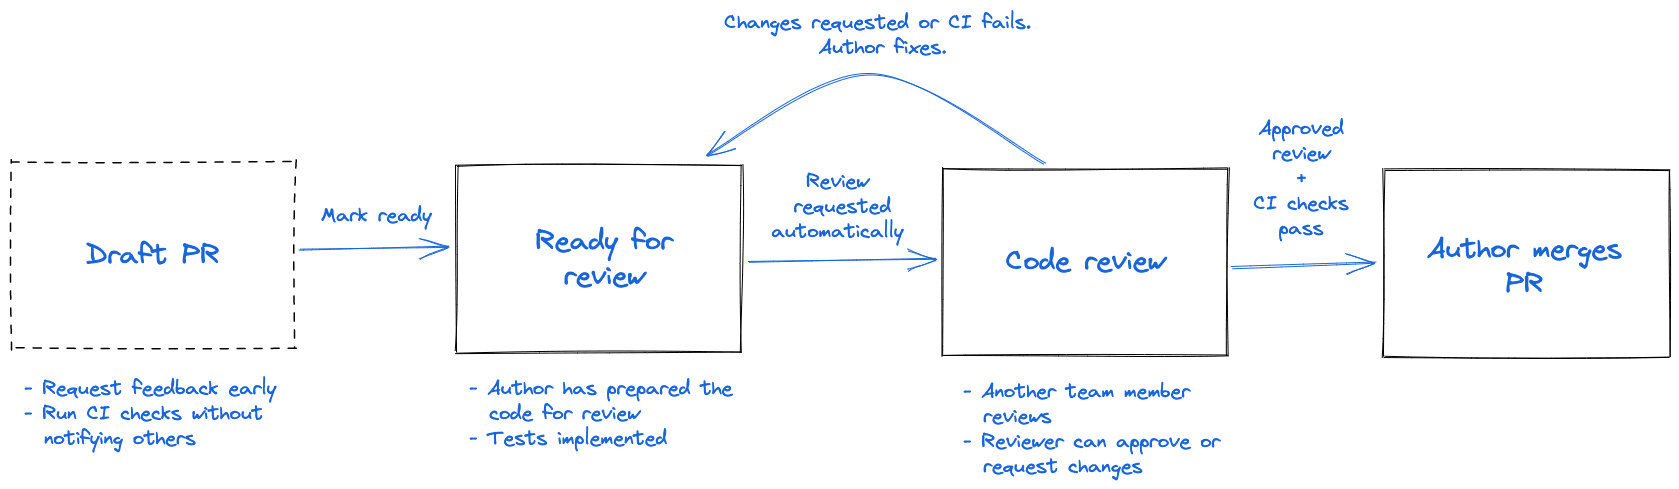 Another Code review